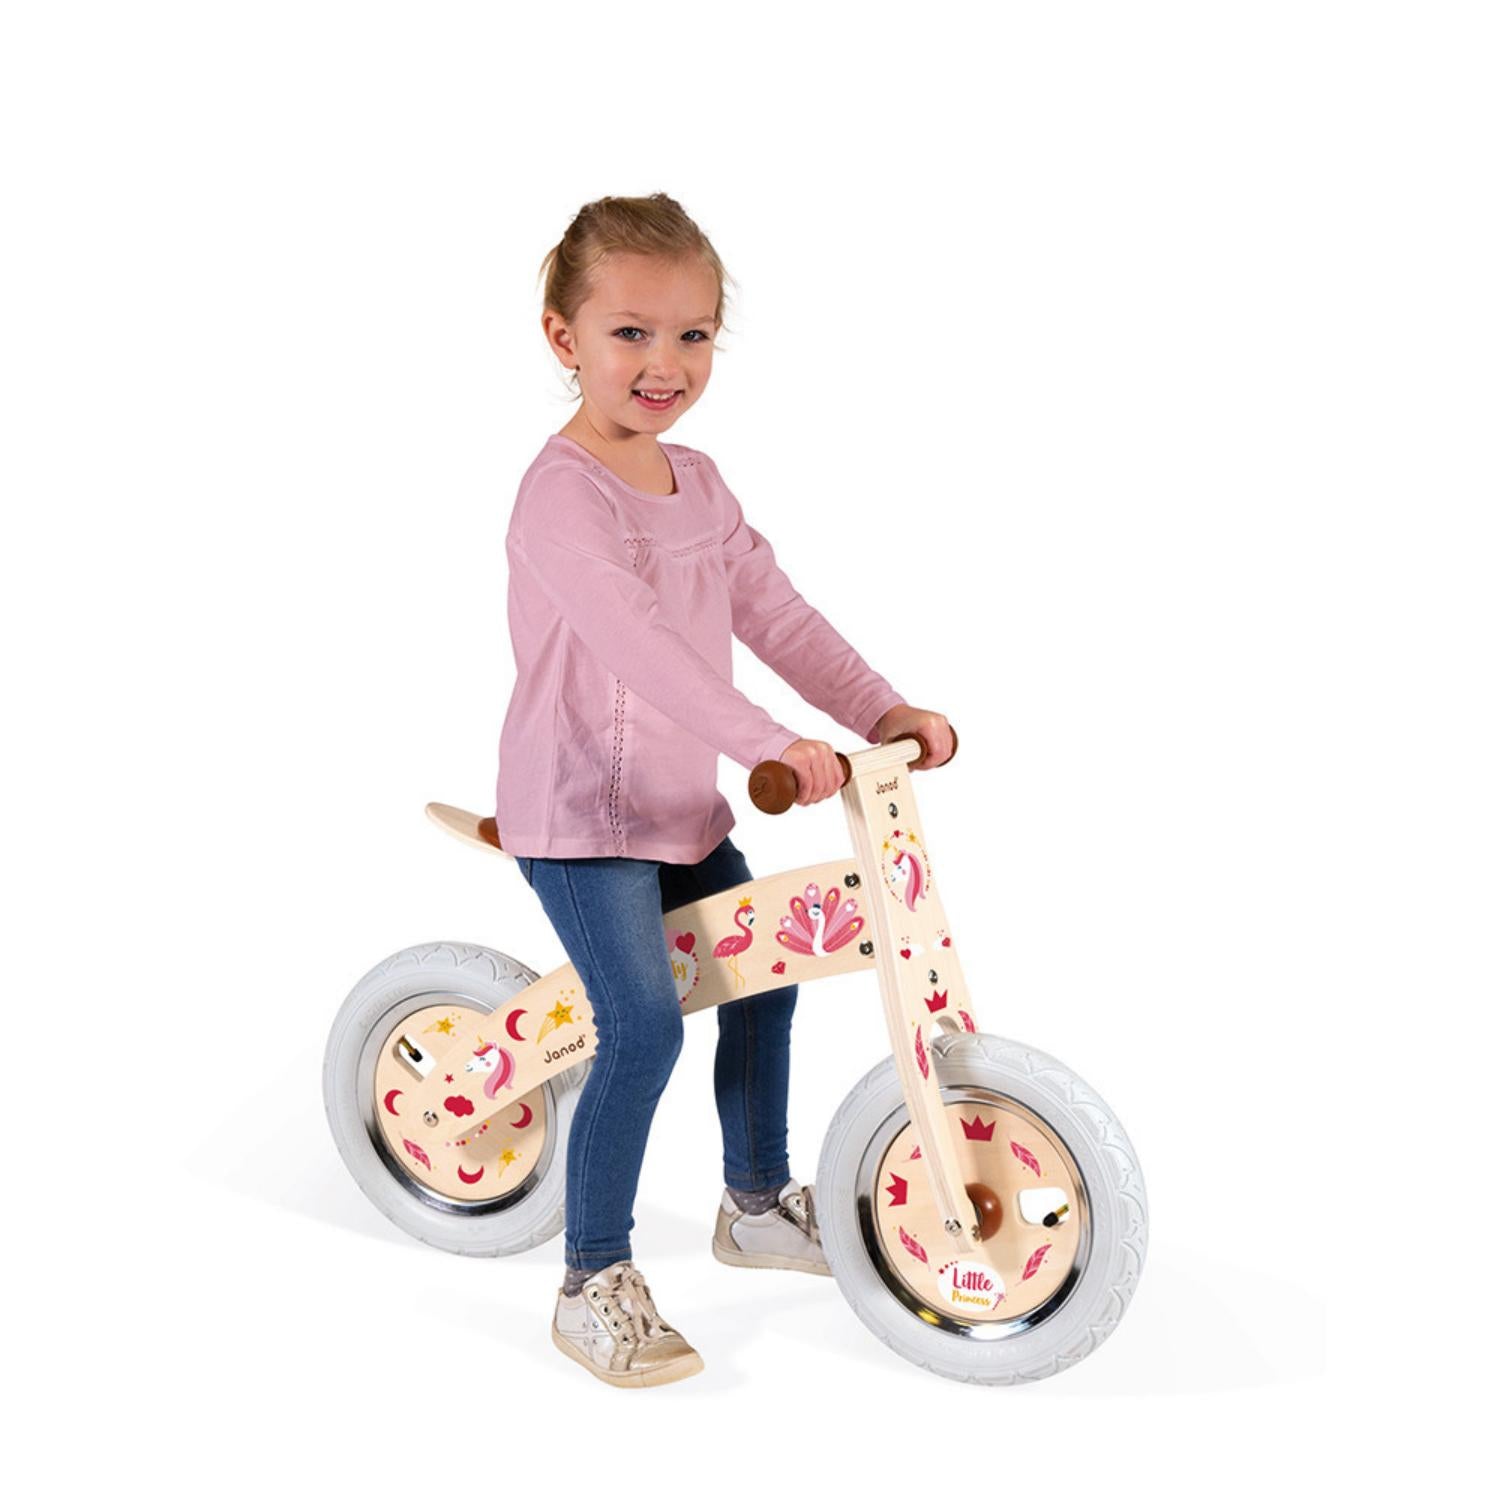 Janod Nature Balance Bike | Activity Wooden Toy| Bikes & Scooters | Lifestyle: Girl with Balance Bike at the Beach | BeoVERDE.ie